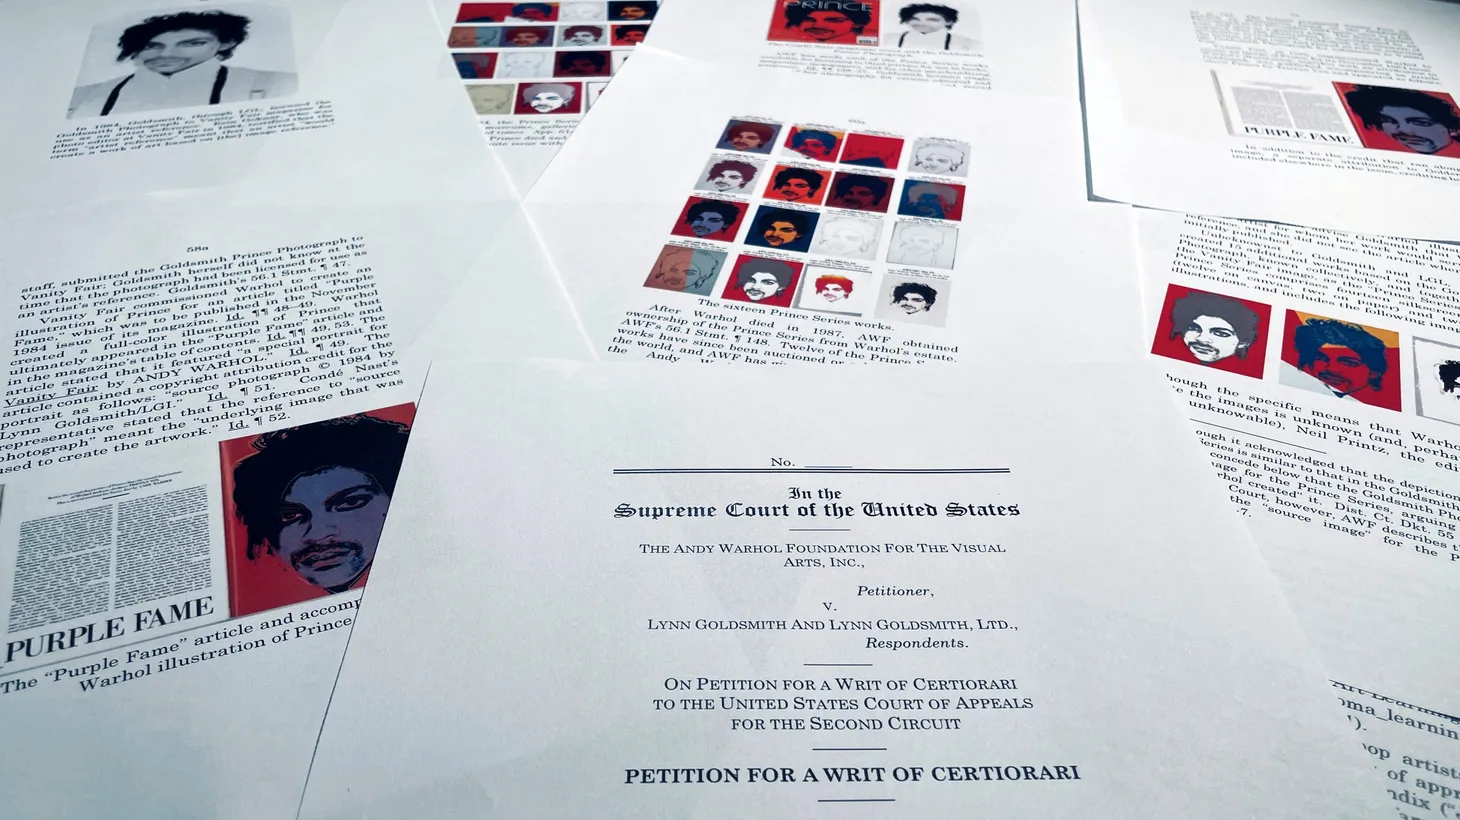 The image shows pages of a petition submitted to the U.S. Supreme Court by the Andy Warhol Foundation for the Visual Arts — in an appeal of a previous judgement in their case against photographer Lynn Goldsmith, concerning Warhol's use of Goldsmith's images of the musical artist Prince, which the court will hear oral arguments over on October 12. Photo taken September 22, 2022.